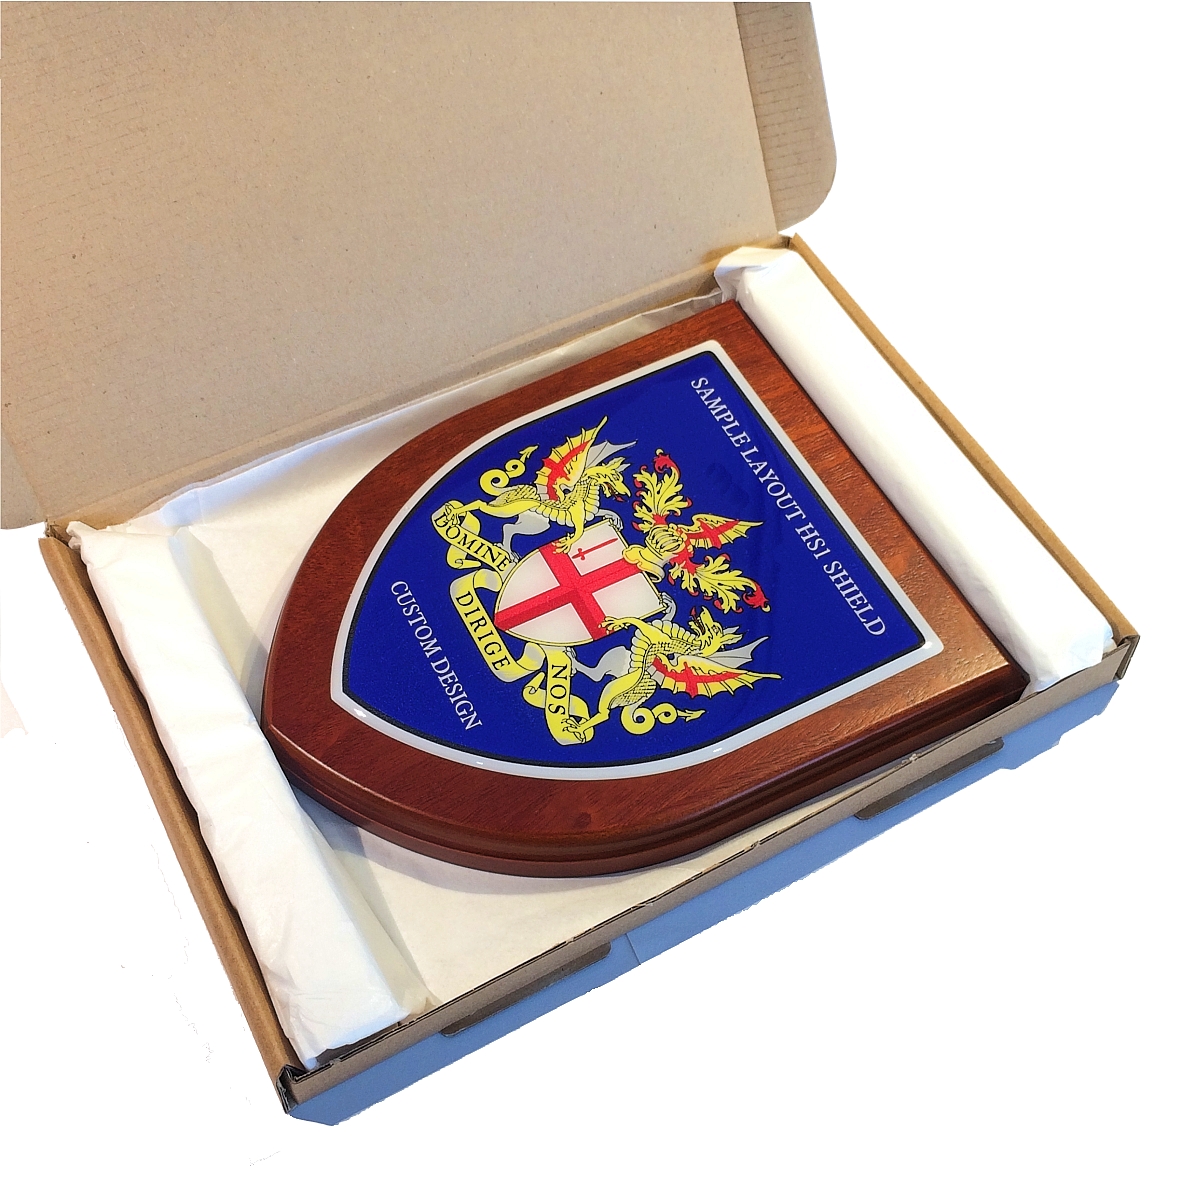 Presentation shield with large shield shaped centrepiece.